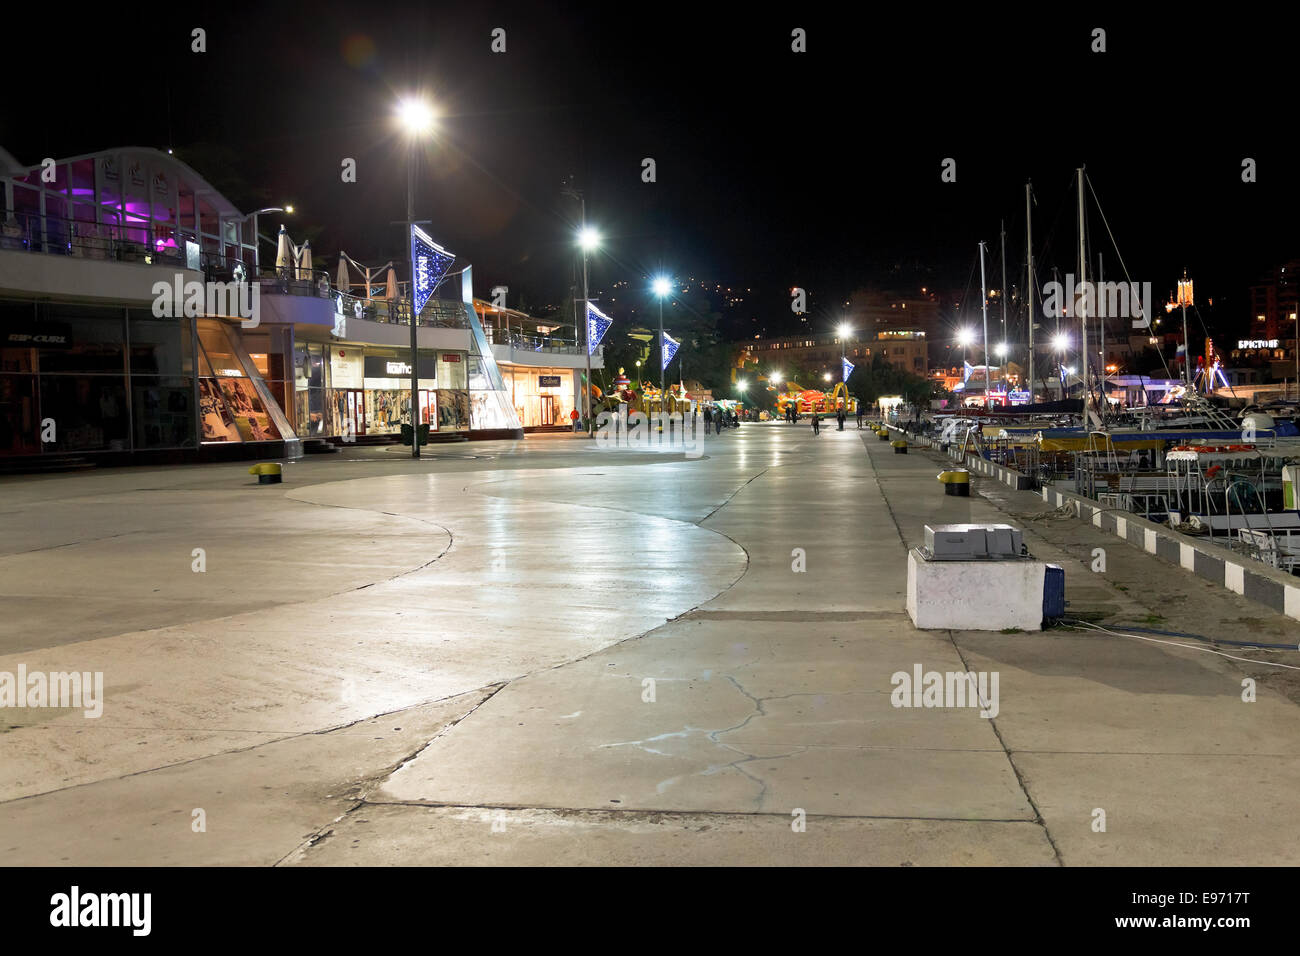 YALTA, RUSSIA - OCTOBER 2, 2014: people walking on seafront in Yalta city in night. Yalta is resort city on the north coast of t Stock Photo